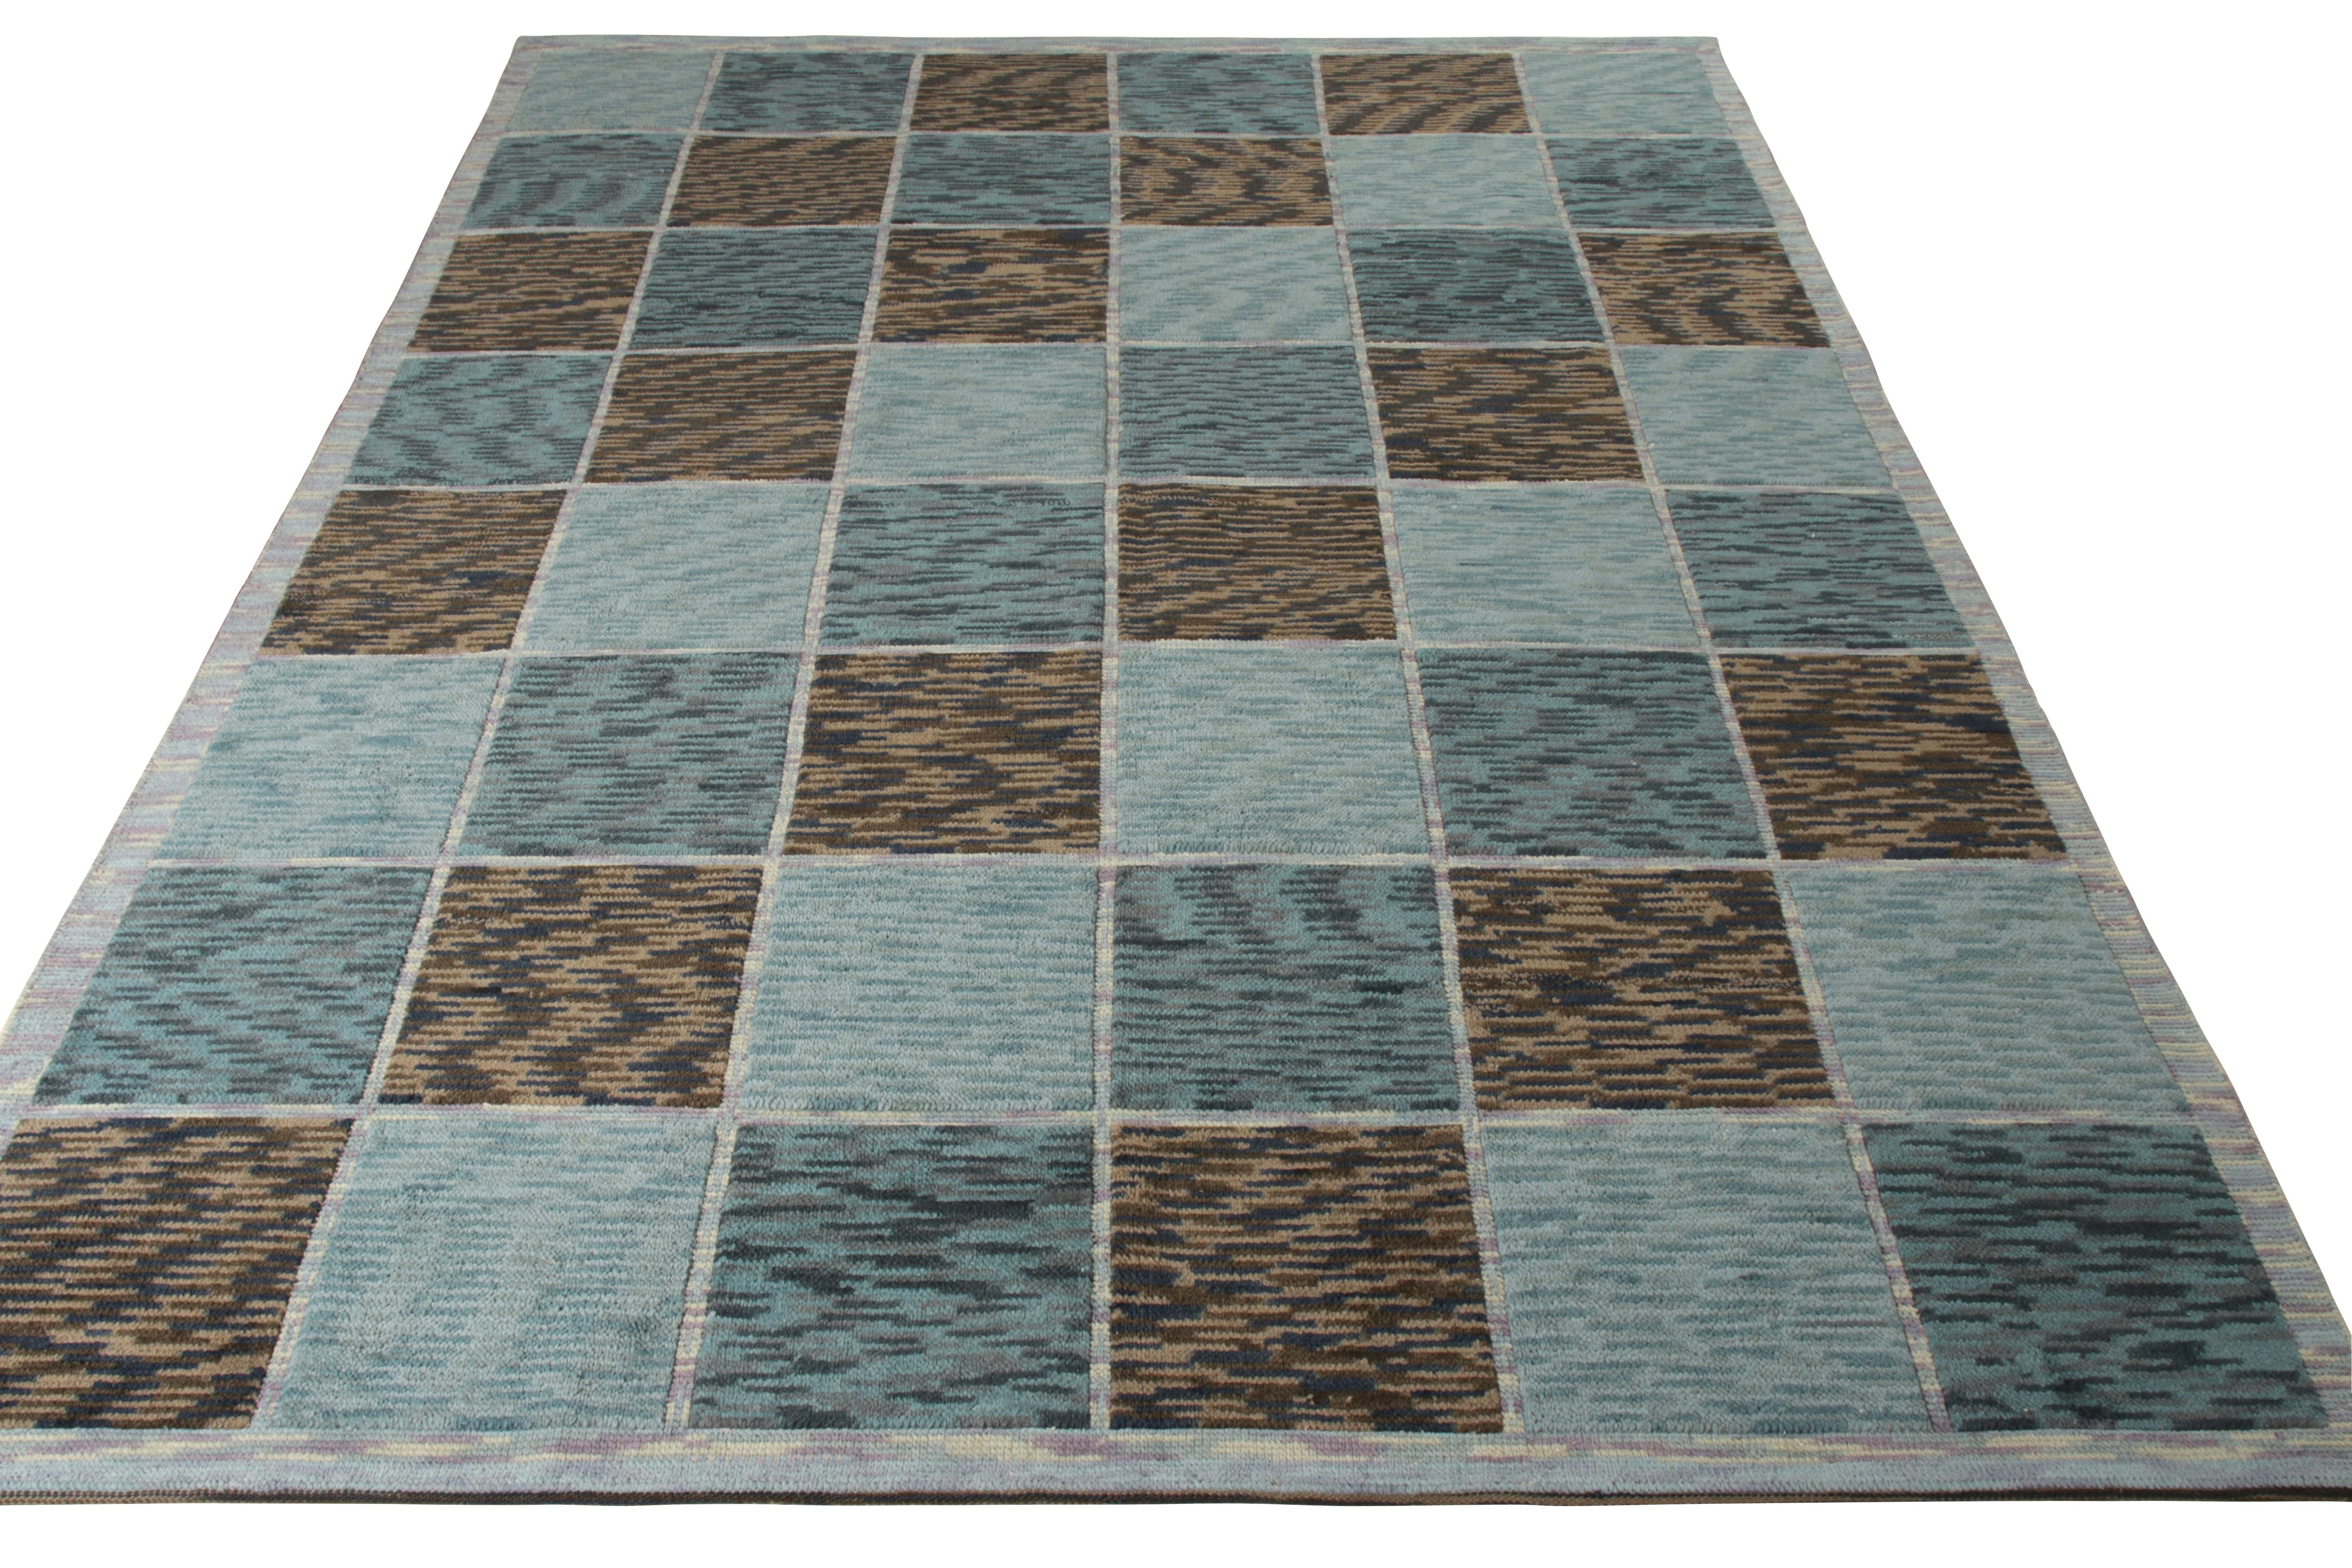 Hand knotted in wool,this modern 9x12 rug is the latest addition to Rug & Kilim’s celebrated Scandinavian Collection. The repeating geometric pattern sits comfortably in a marriage of blue and beige-brown hues with a high-low pile refinement. The